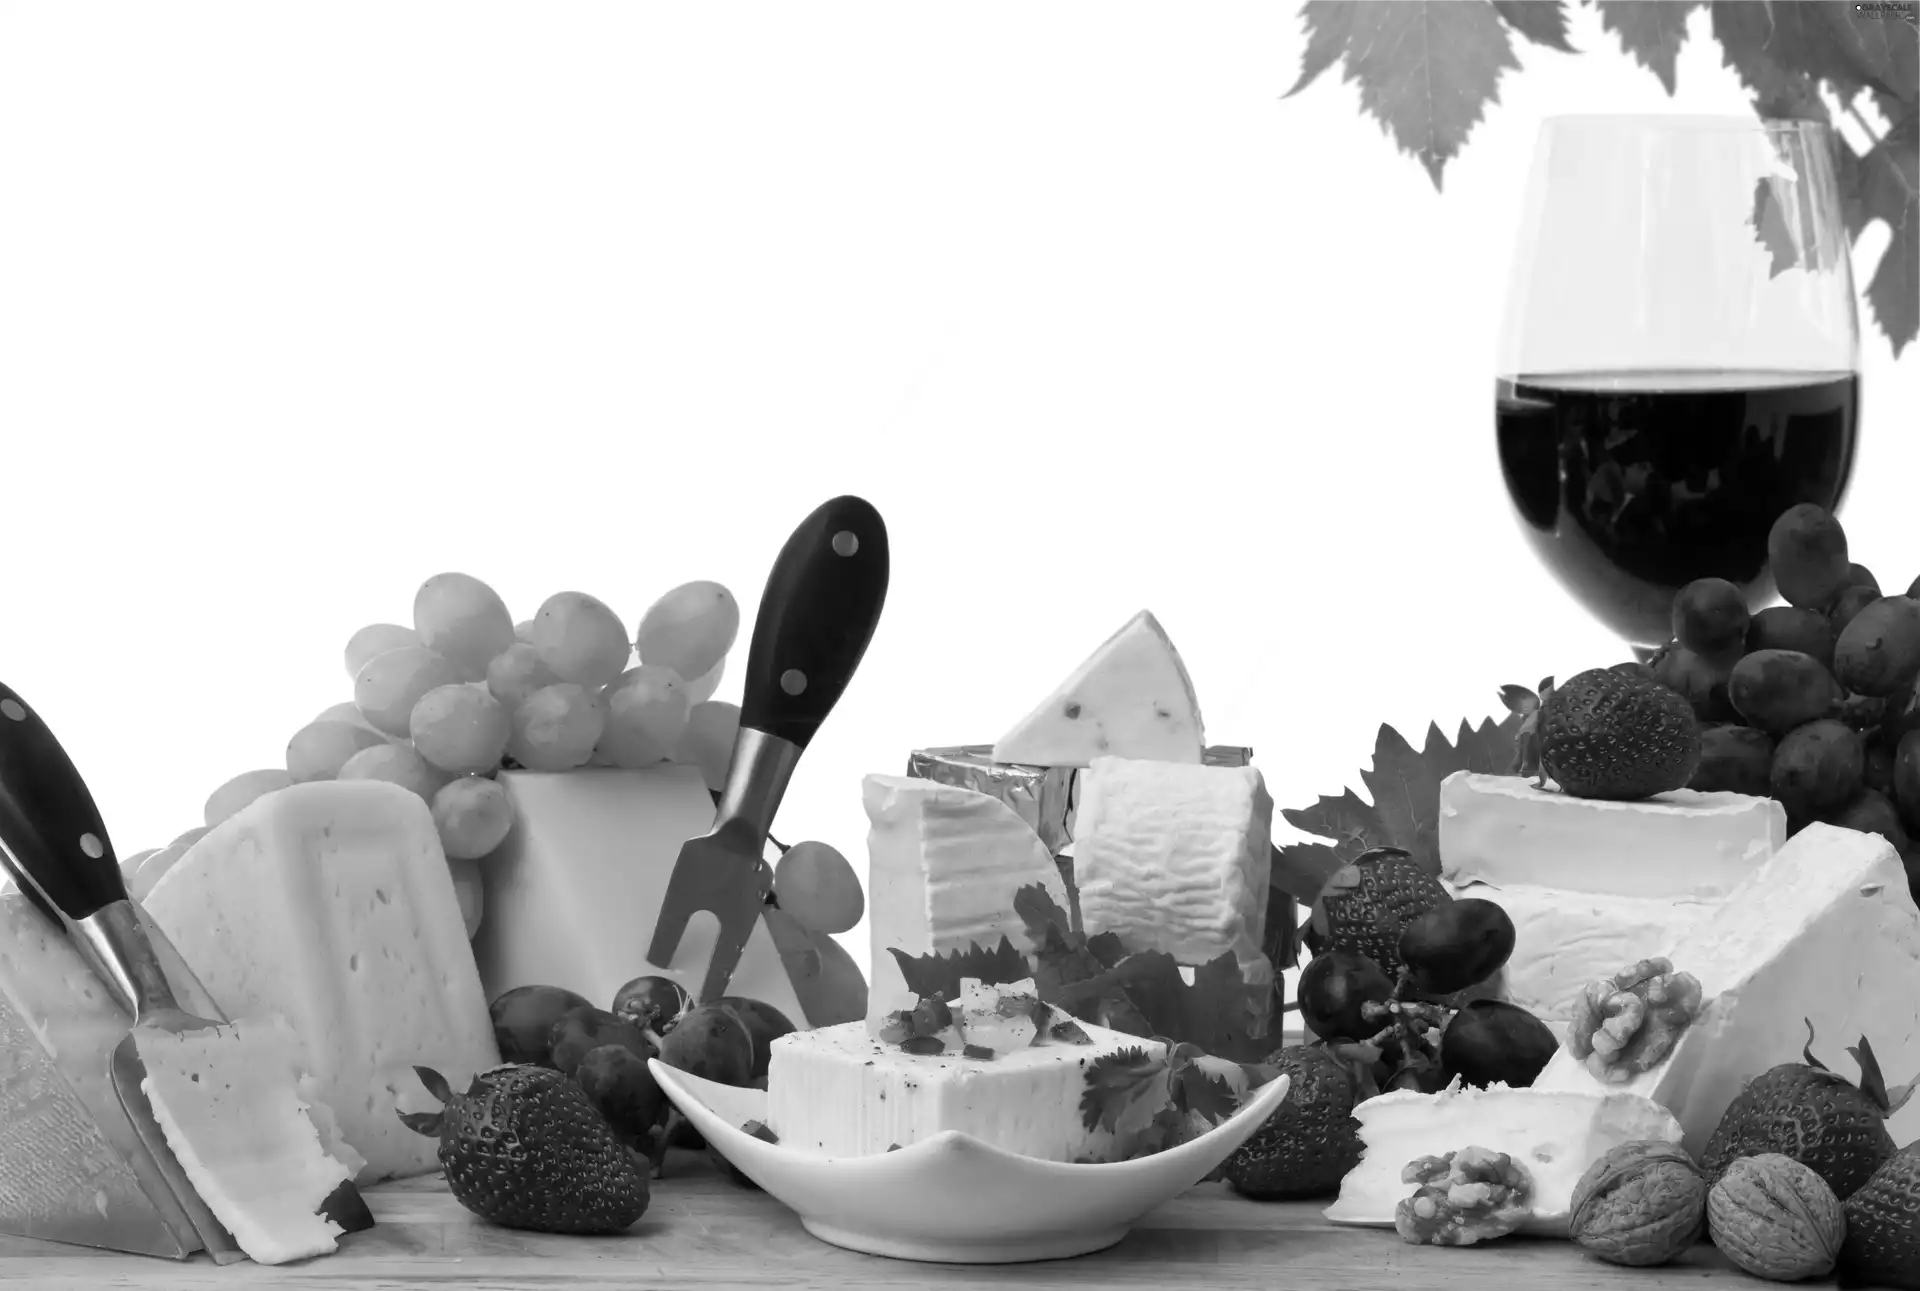 Wine, Grapes, Species, cheeses, different